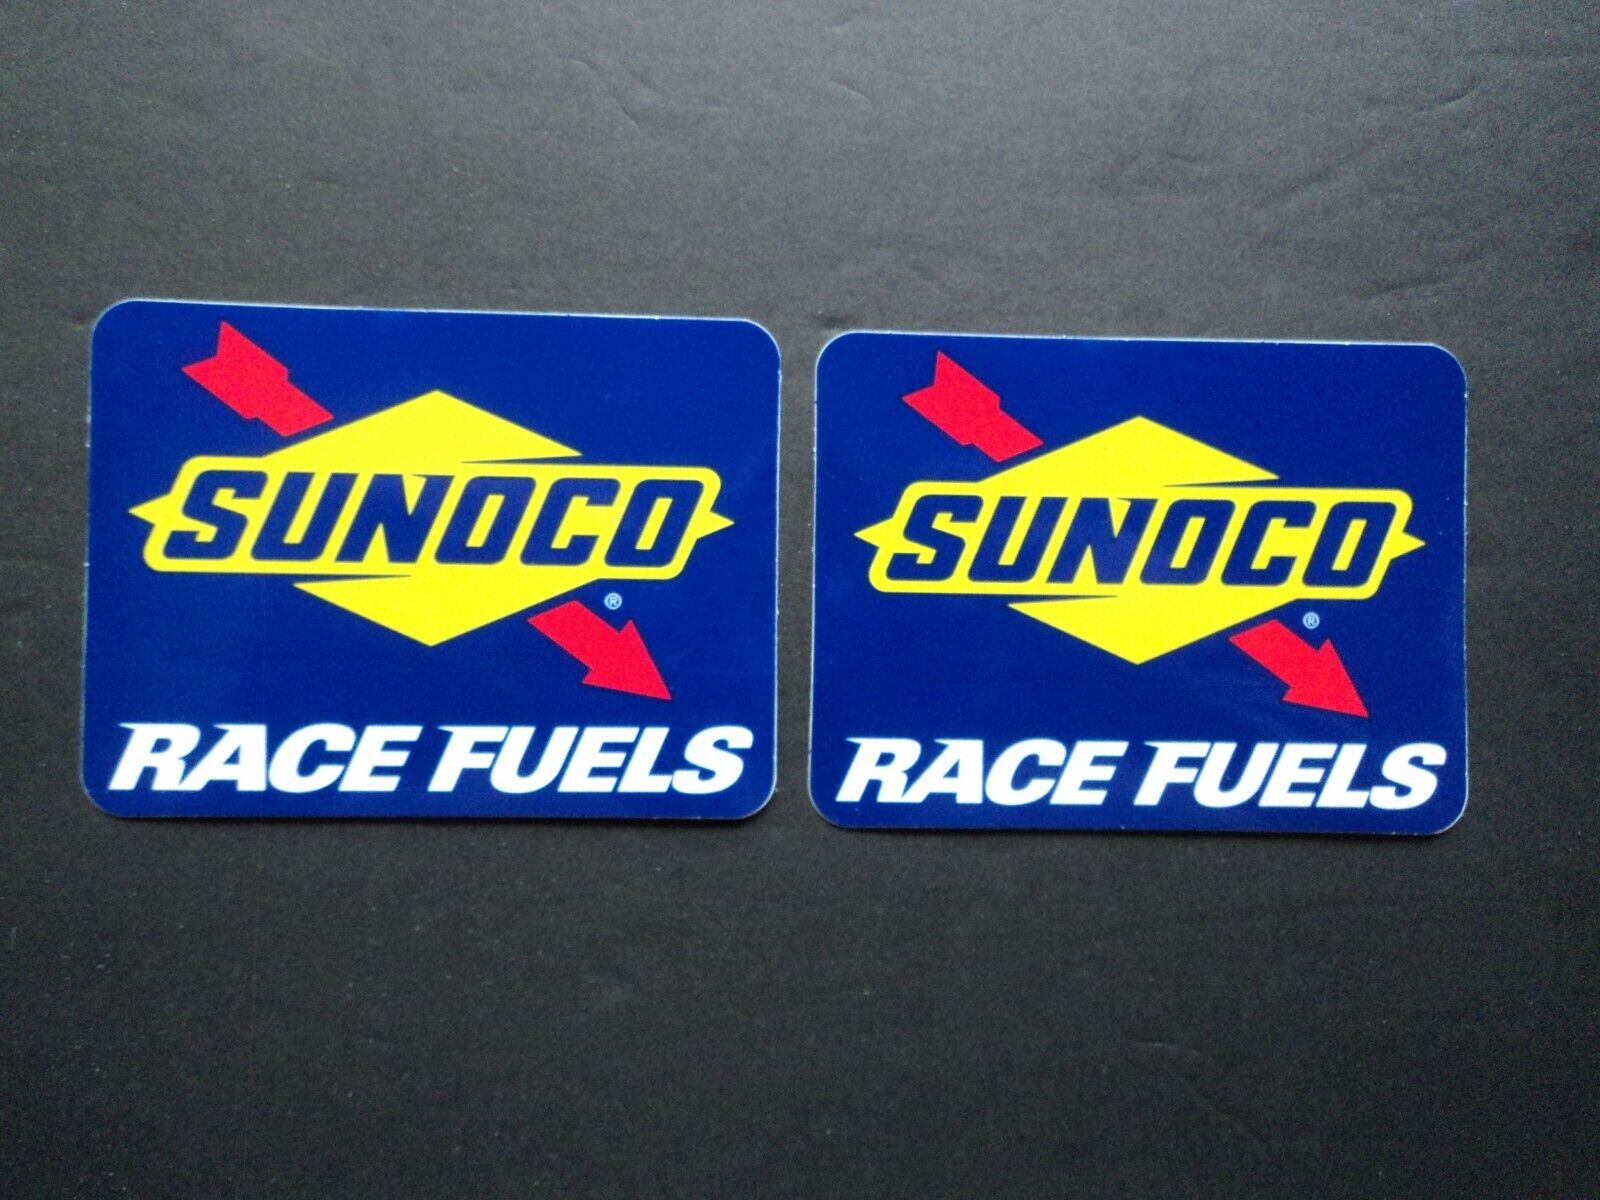 Lot of 2 Authentic SUNOCO Race Fuels Racing Decals Stickers NASCAR NHRA 